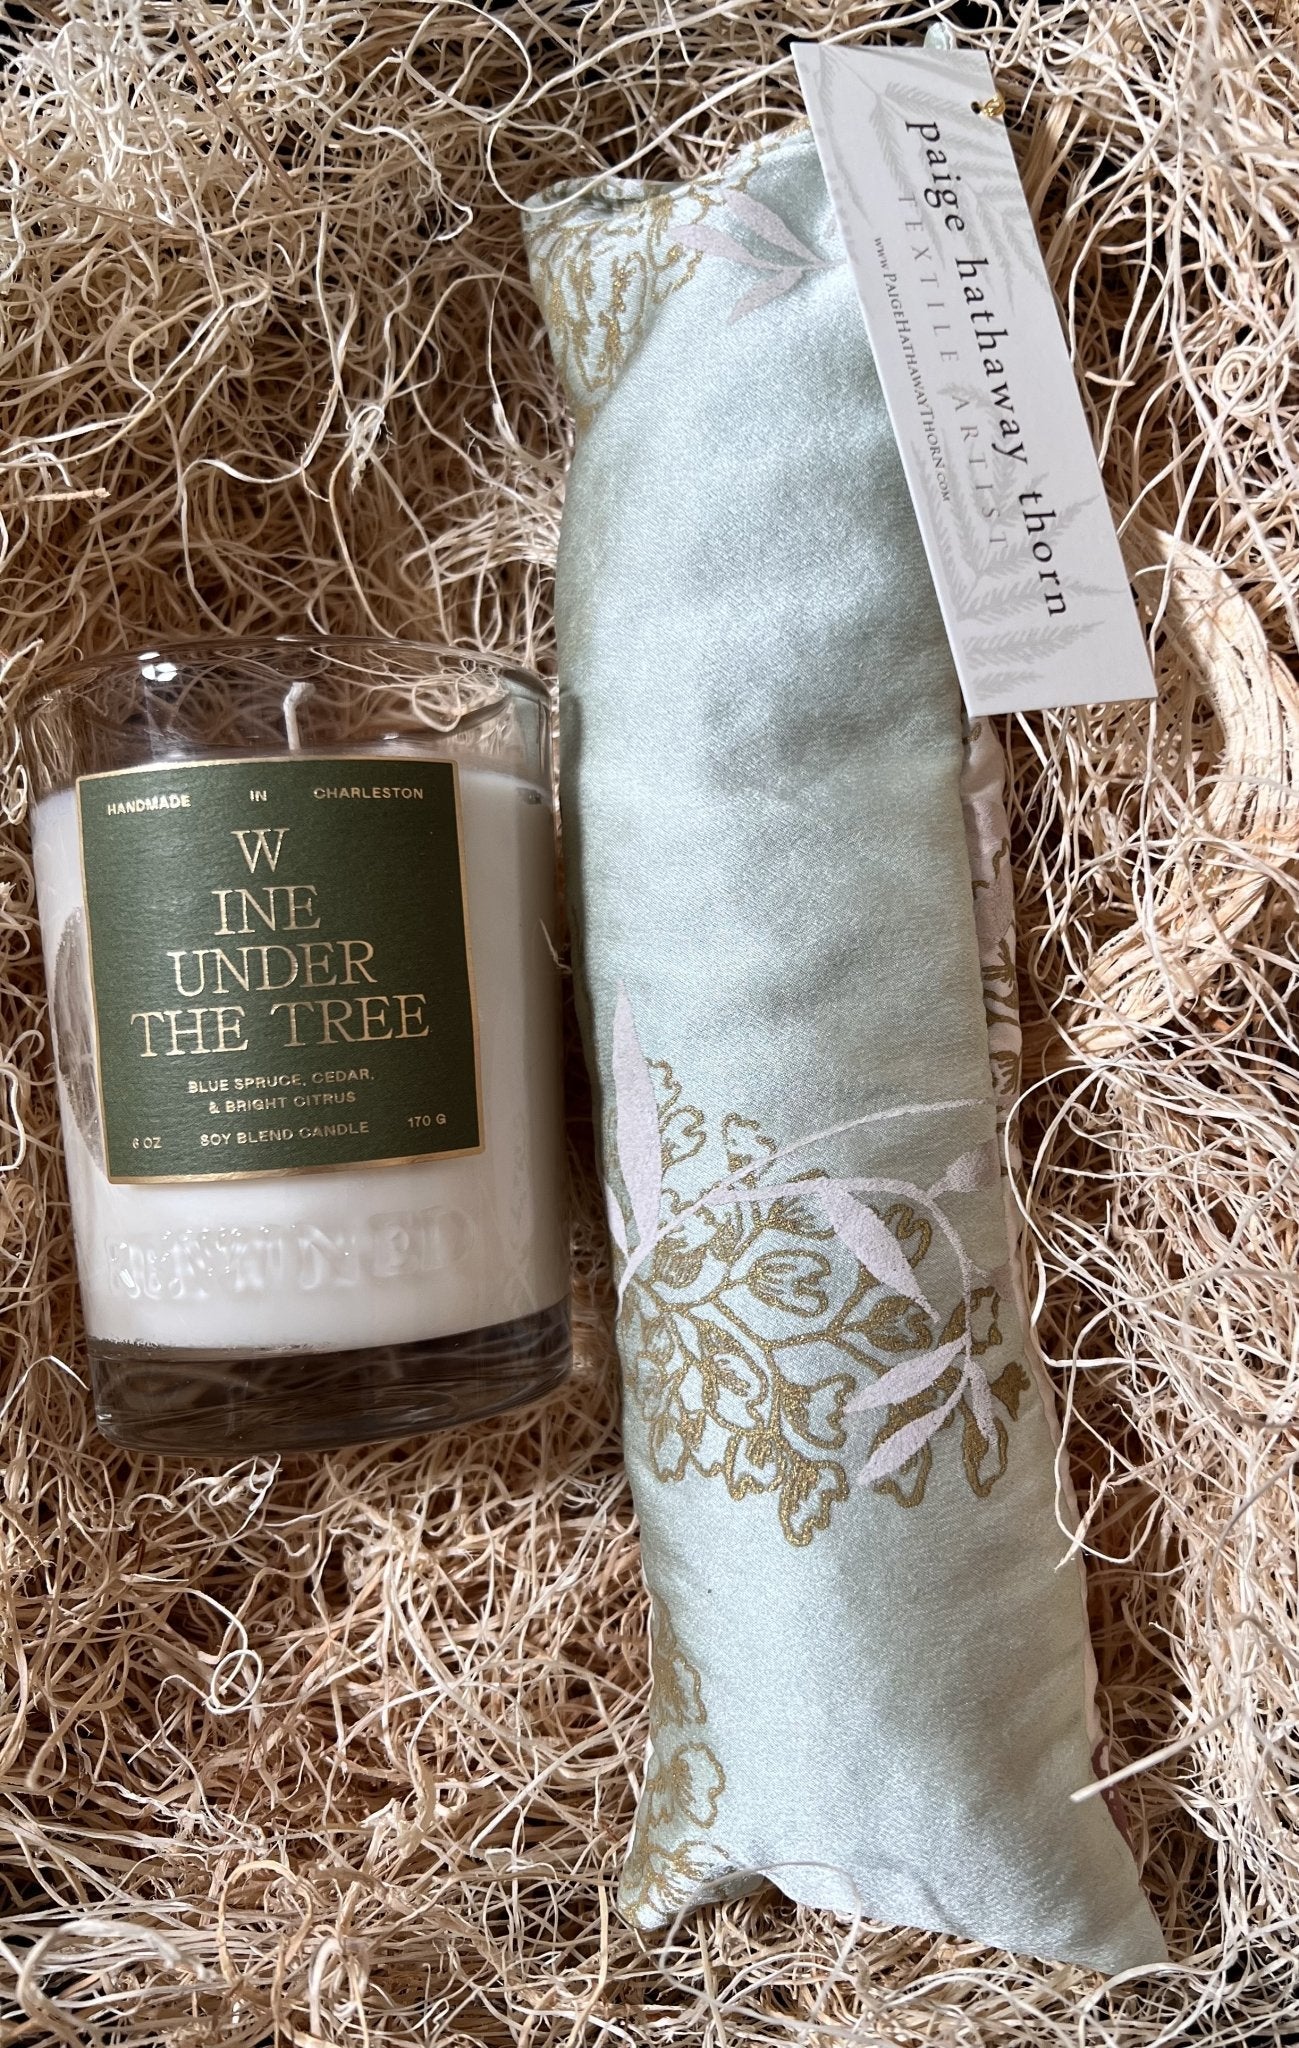 Perfect Pair: Paige Hathaway Thorn Eye Pillow + Rewined Under the Tree Candle - Essentially Charleston